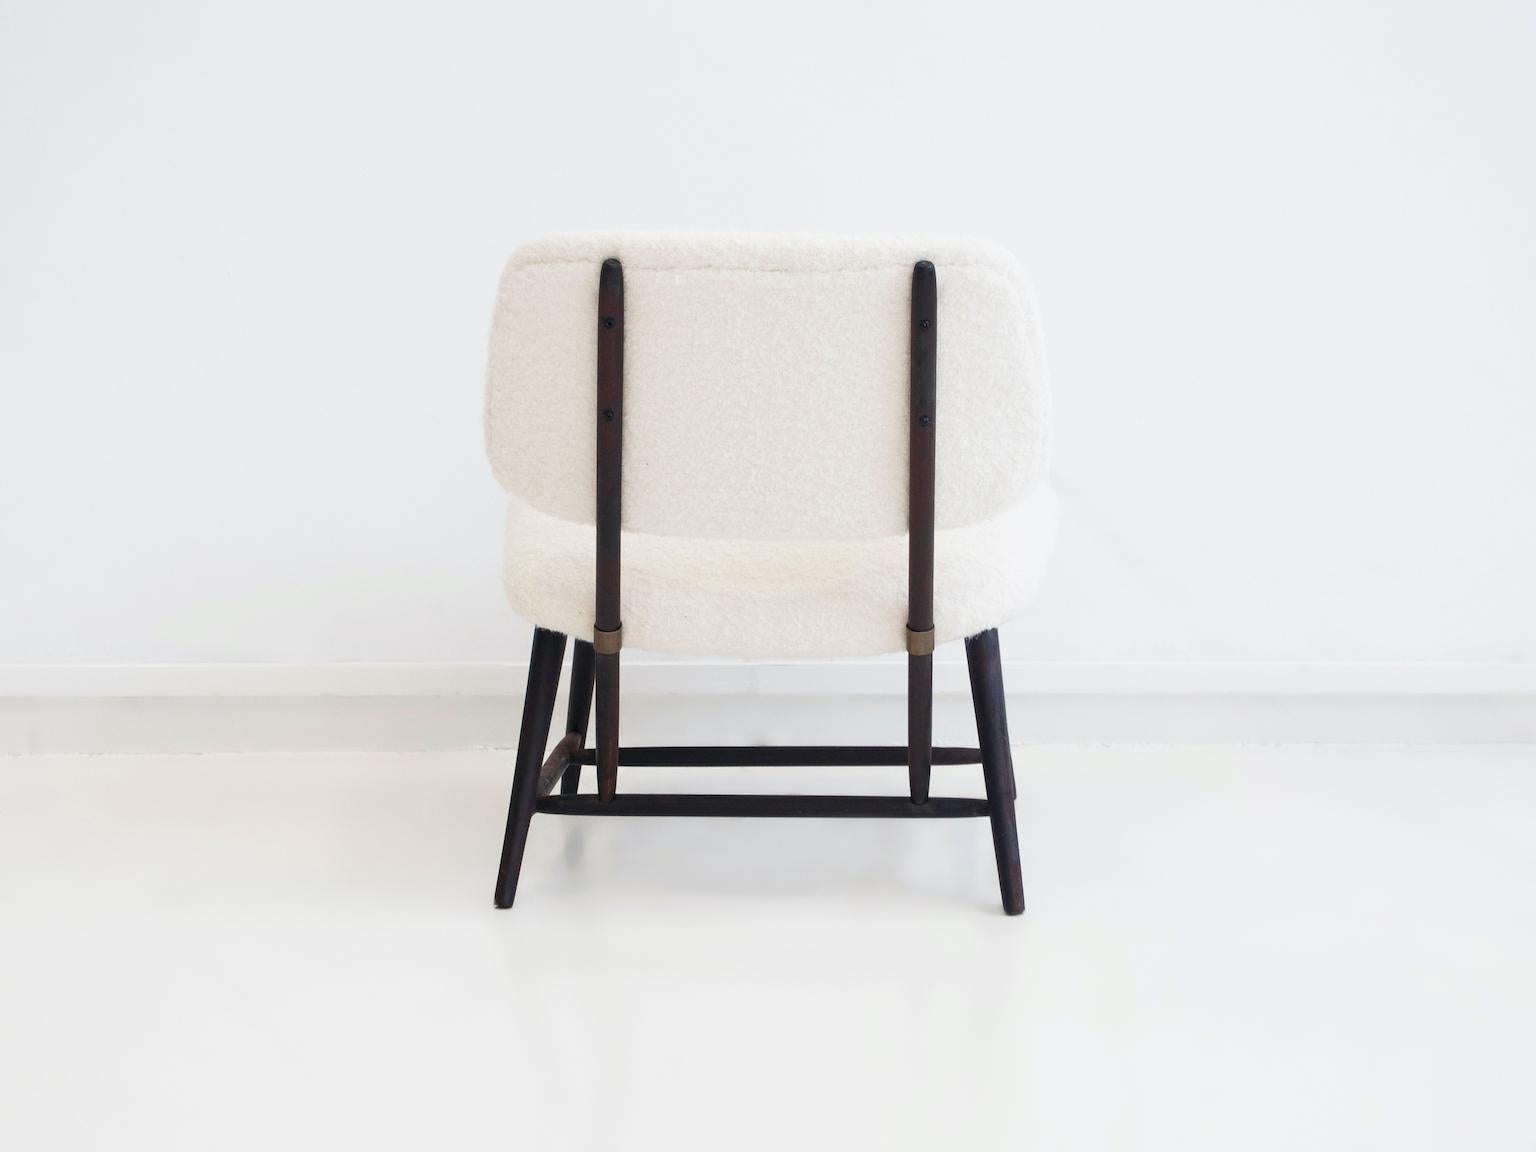 Alf Svensson TeVe Wooden Chair with White Bouclé Fabric Upholstery 2